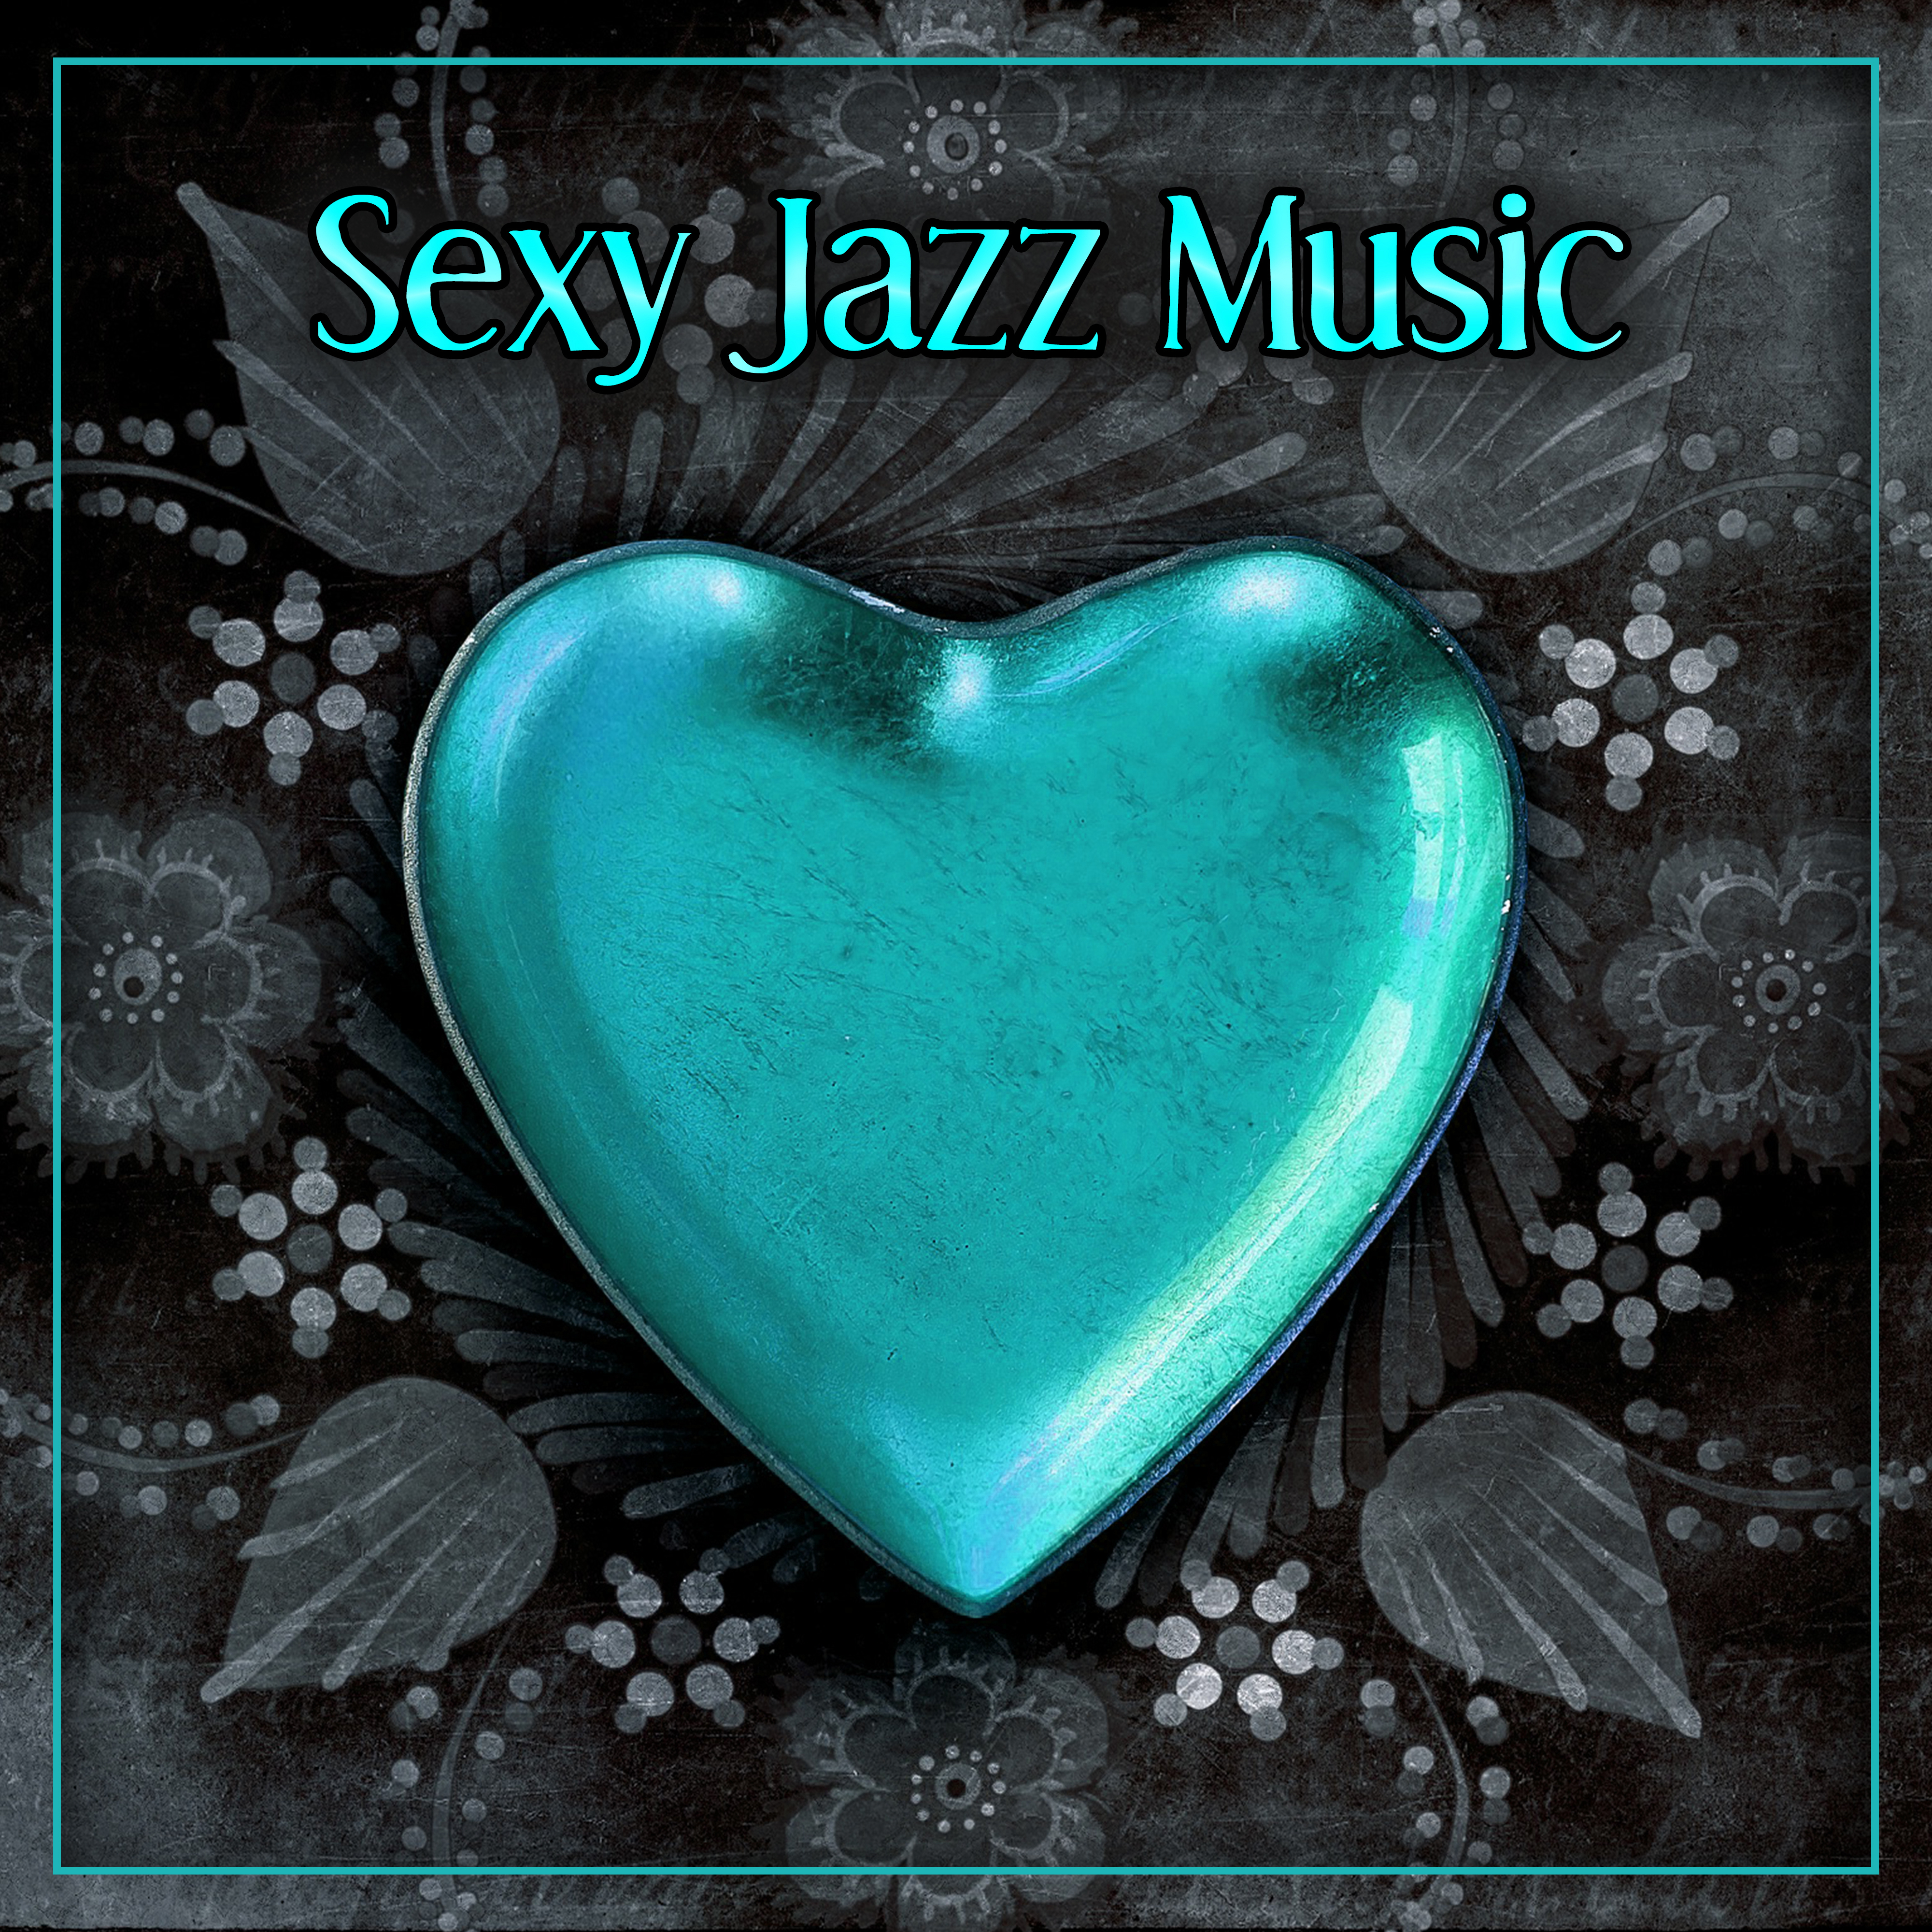 **** Jazz Music – Jazz Music for Sensual Moments, **** Piano Music, Mellow Jazz After Dark, Romantic Jazz Sounds